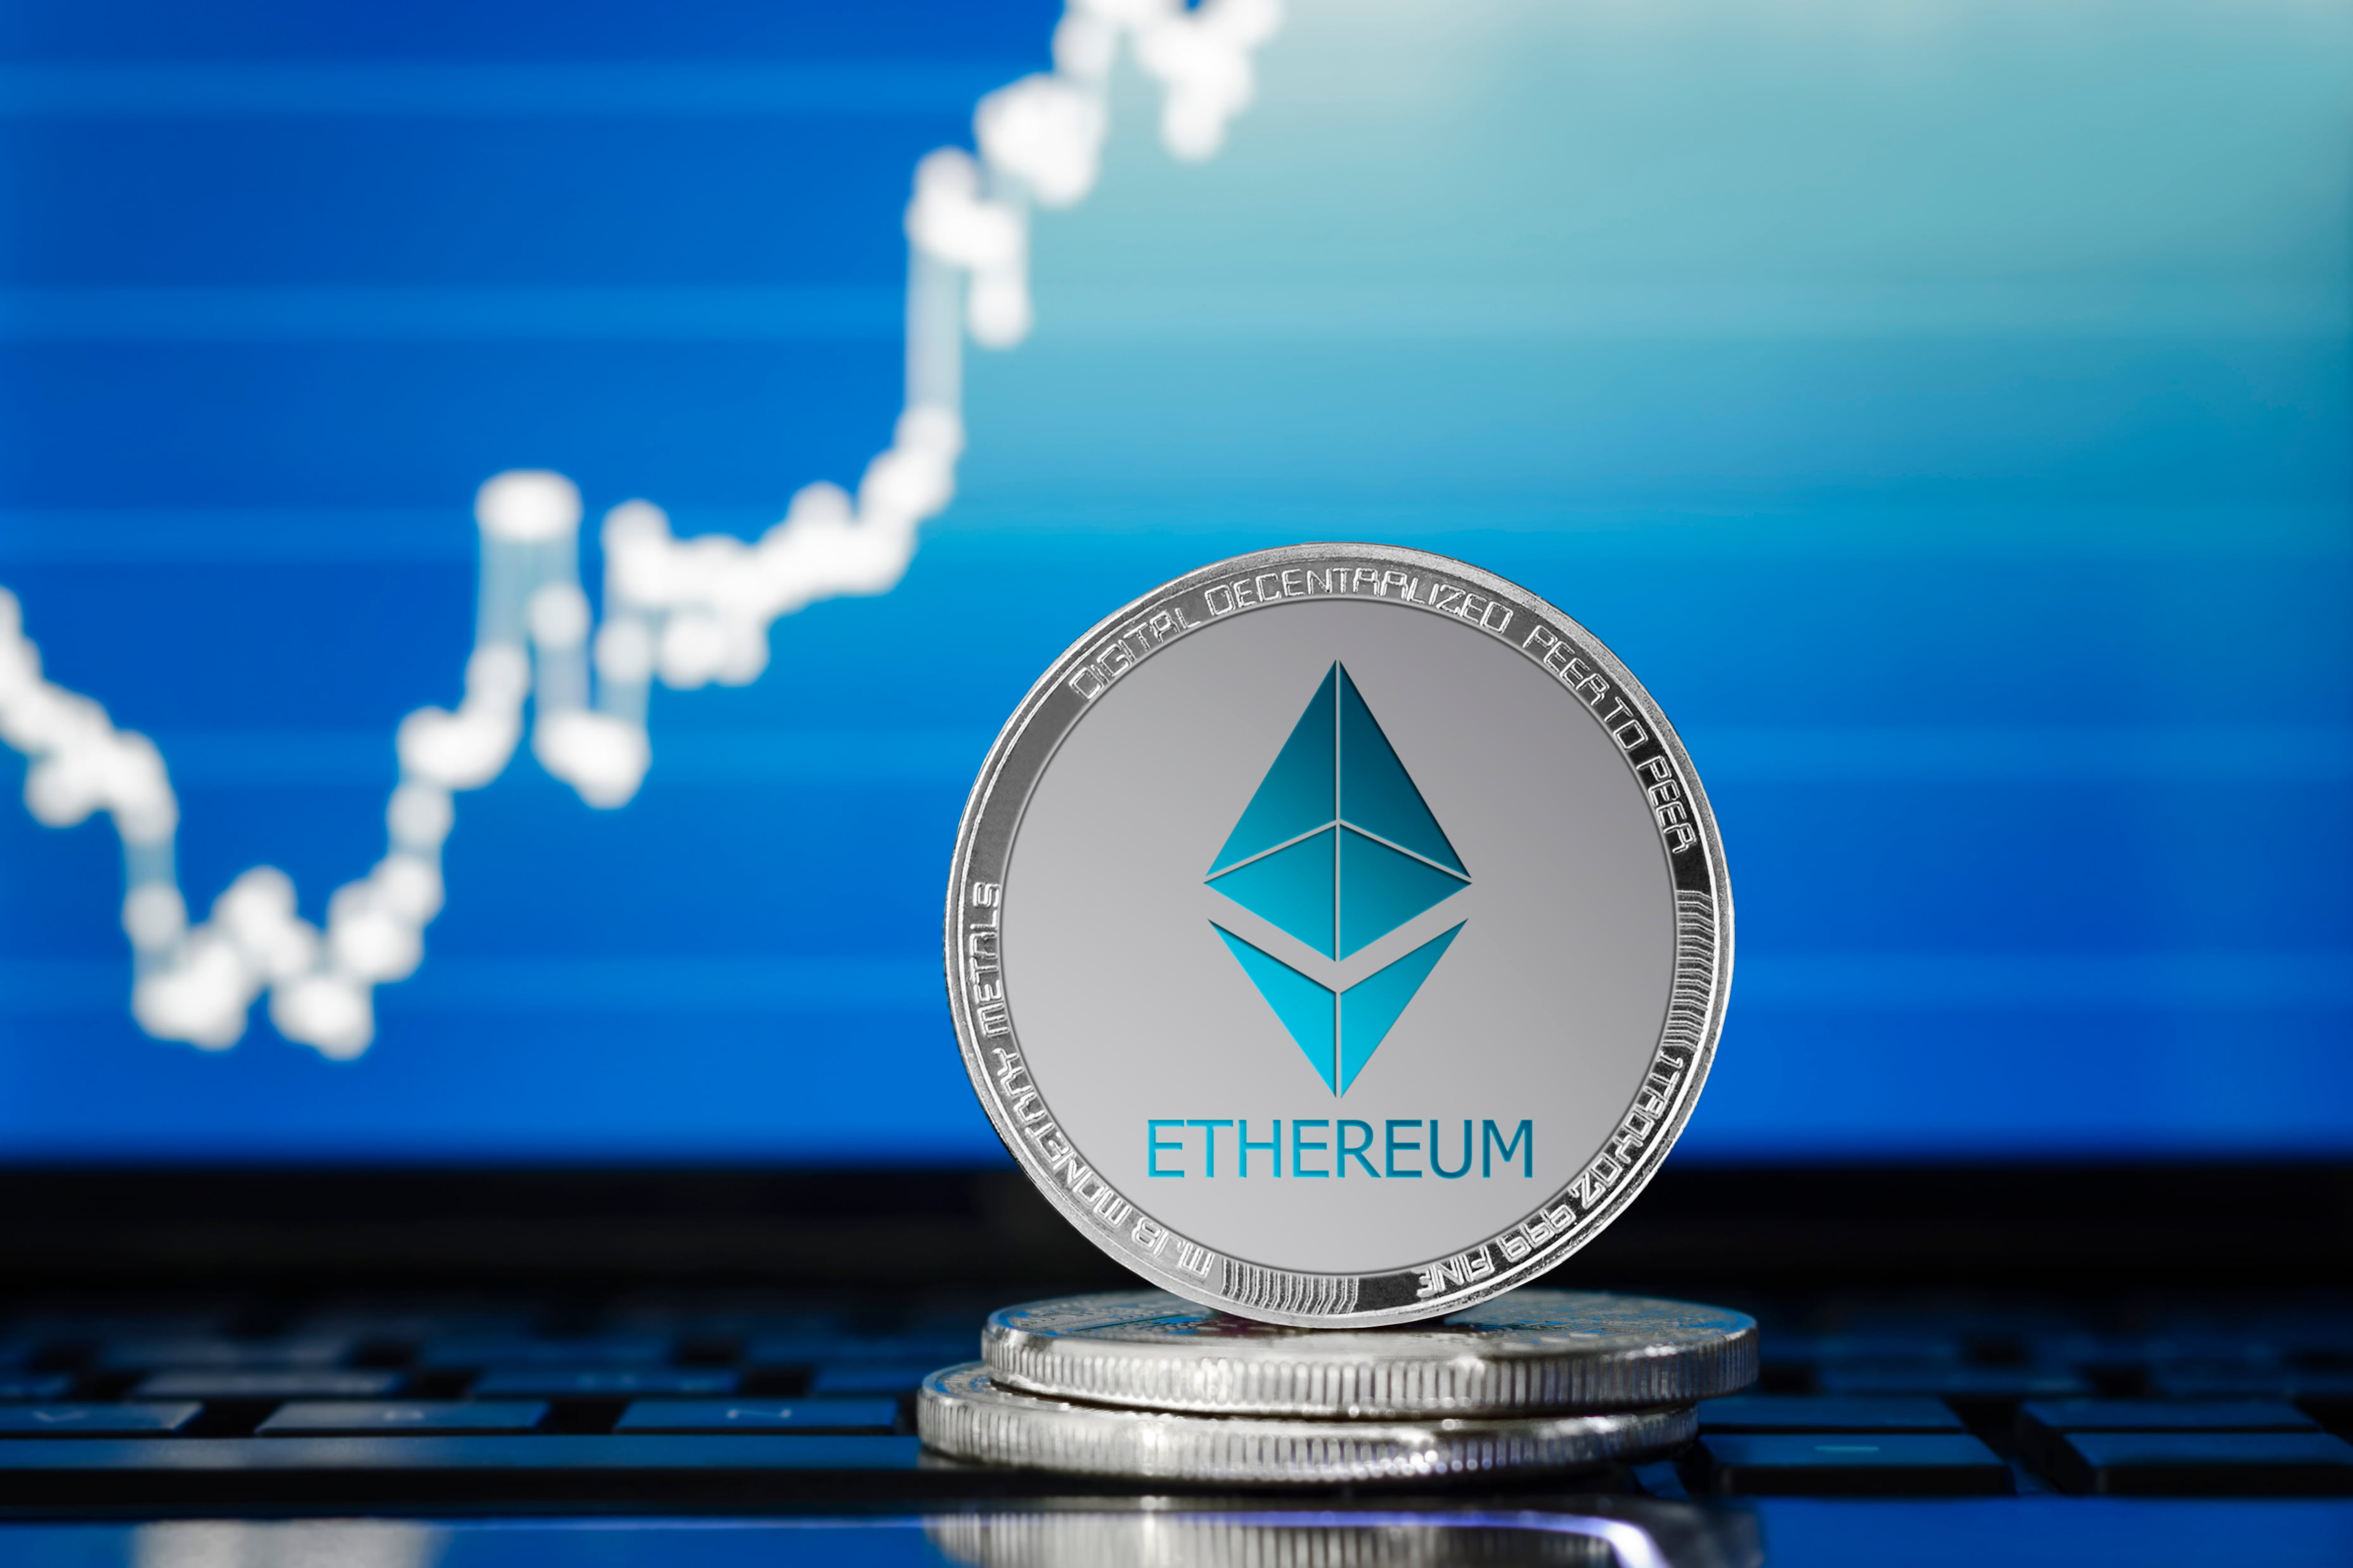 Ethereum stability buying ripple cryptocurrencies